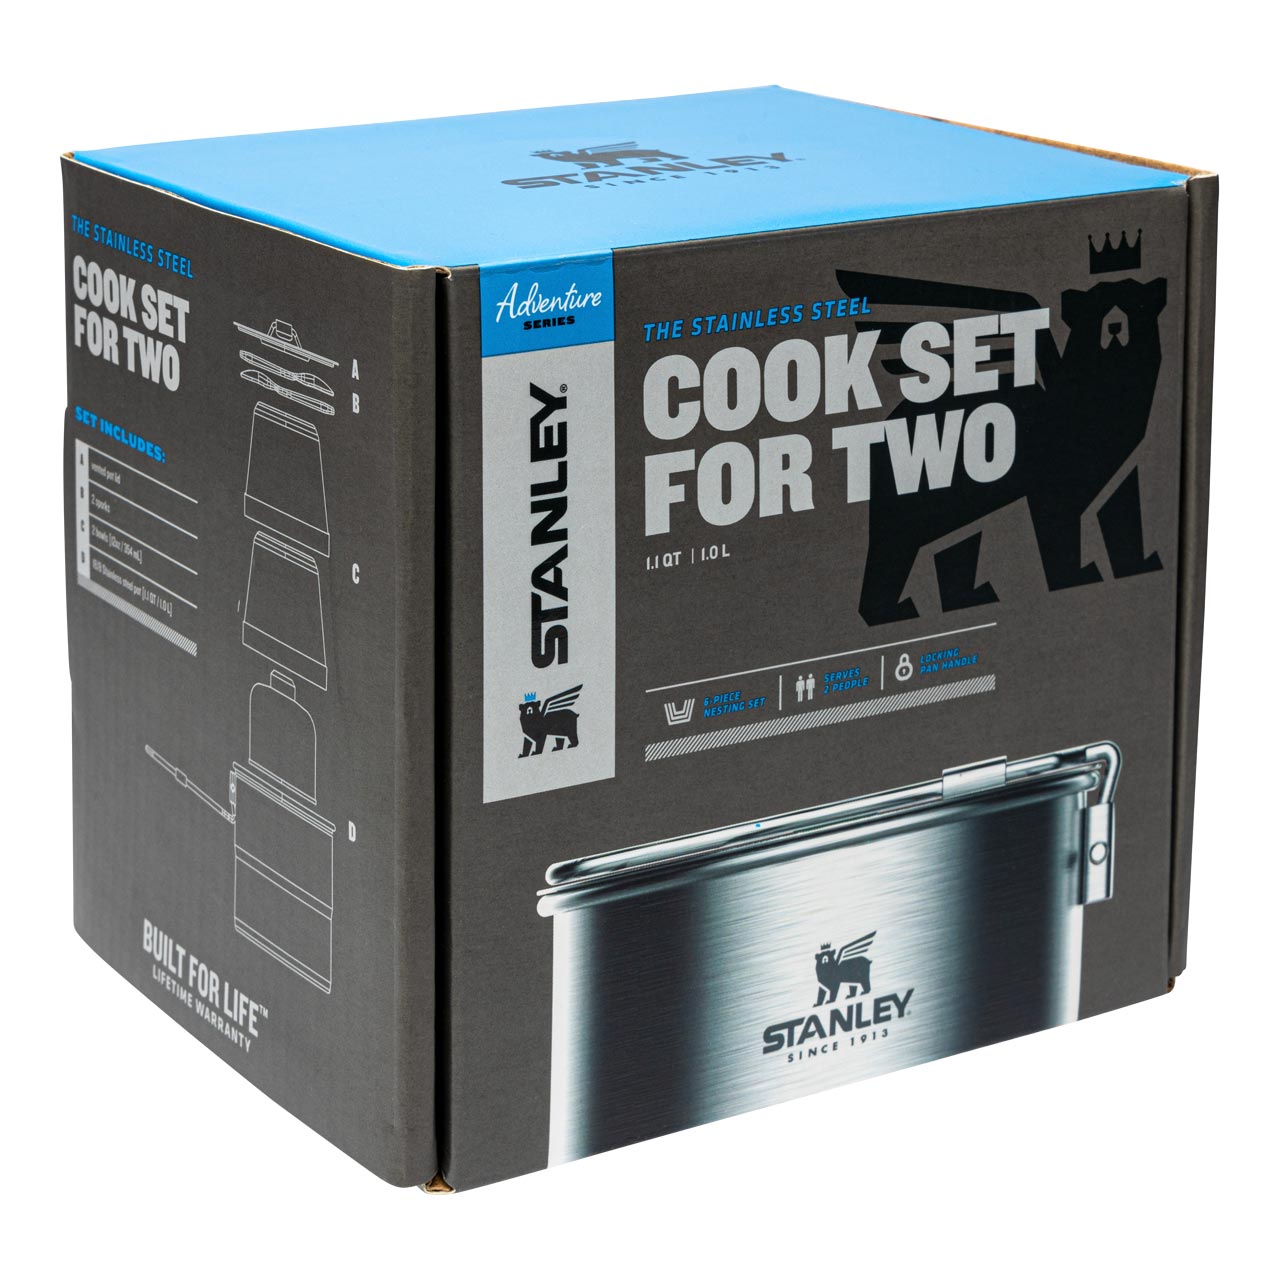 COOK SET FOR TWO 1.0L